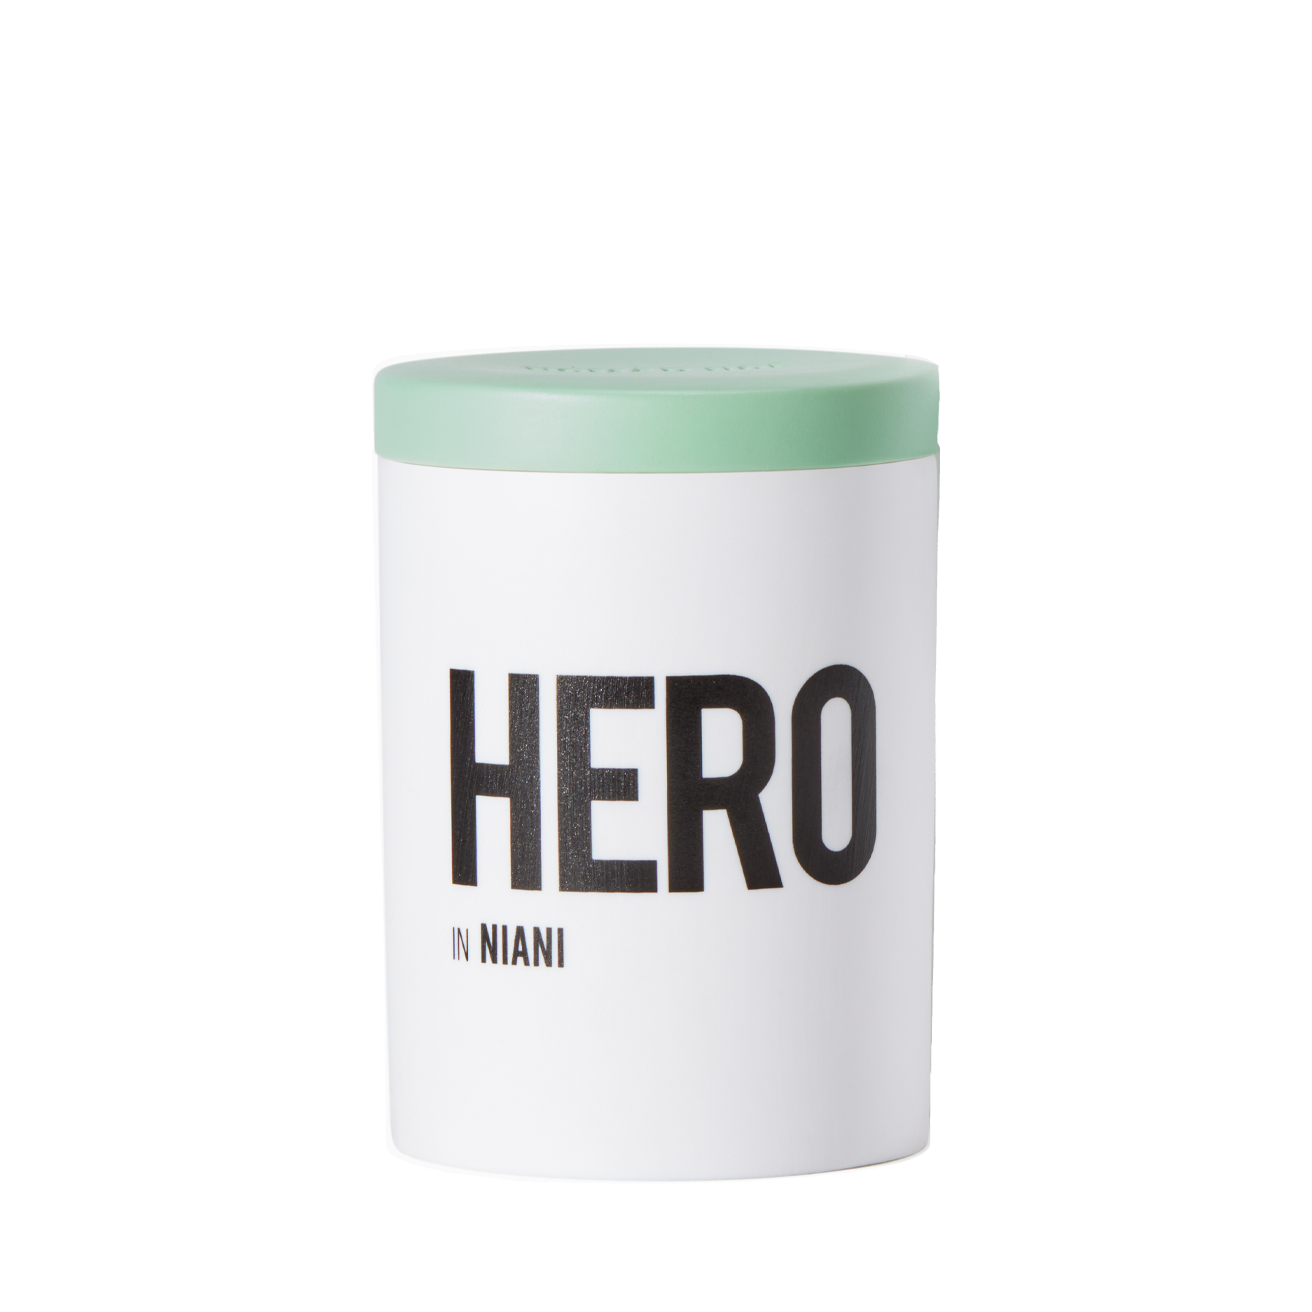 Nomad Noé Hero in Niani candle